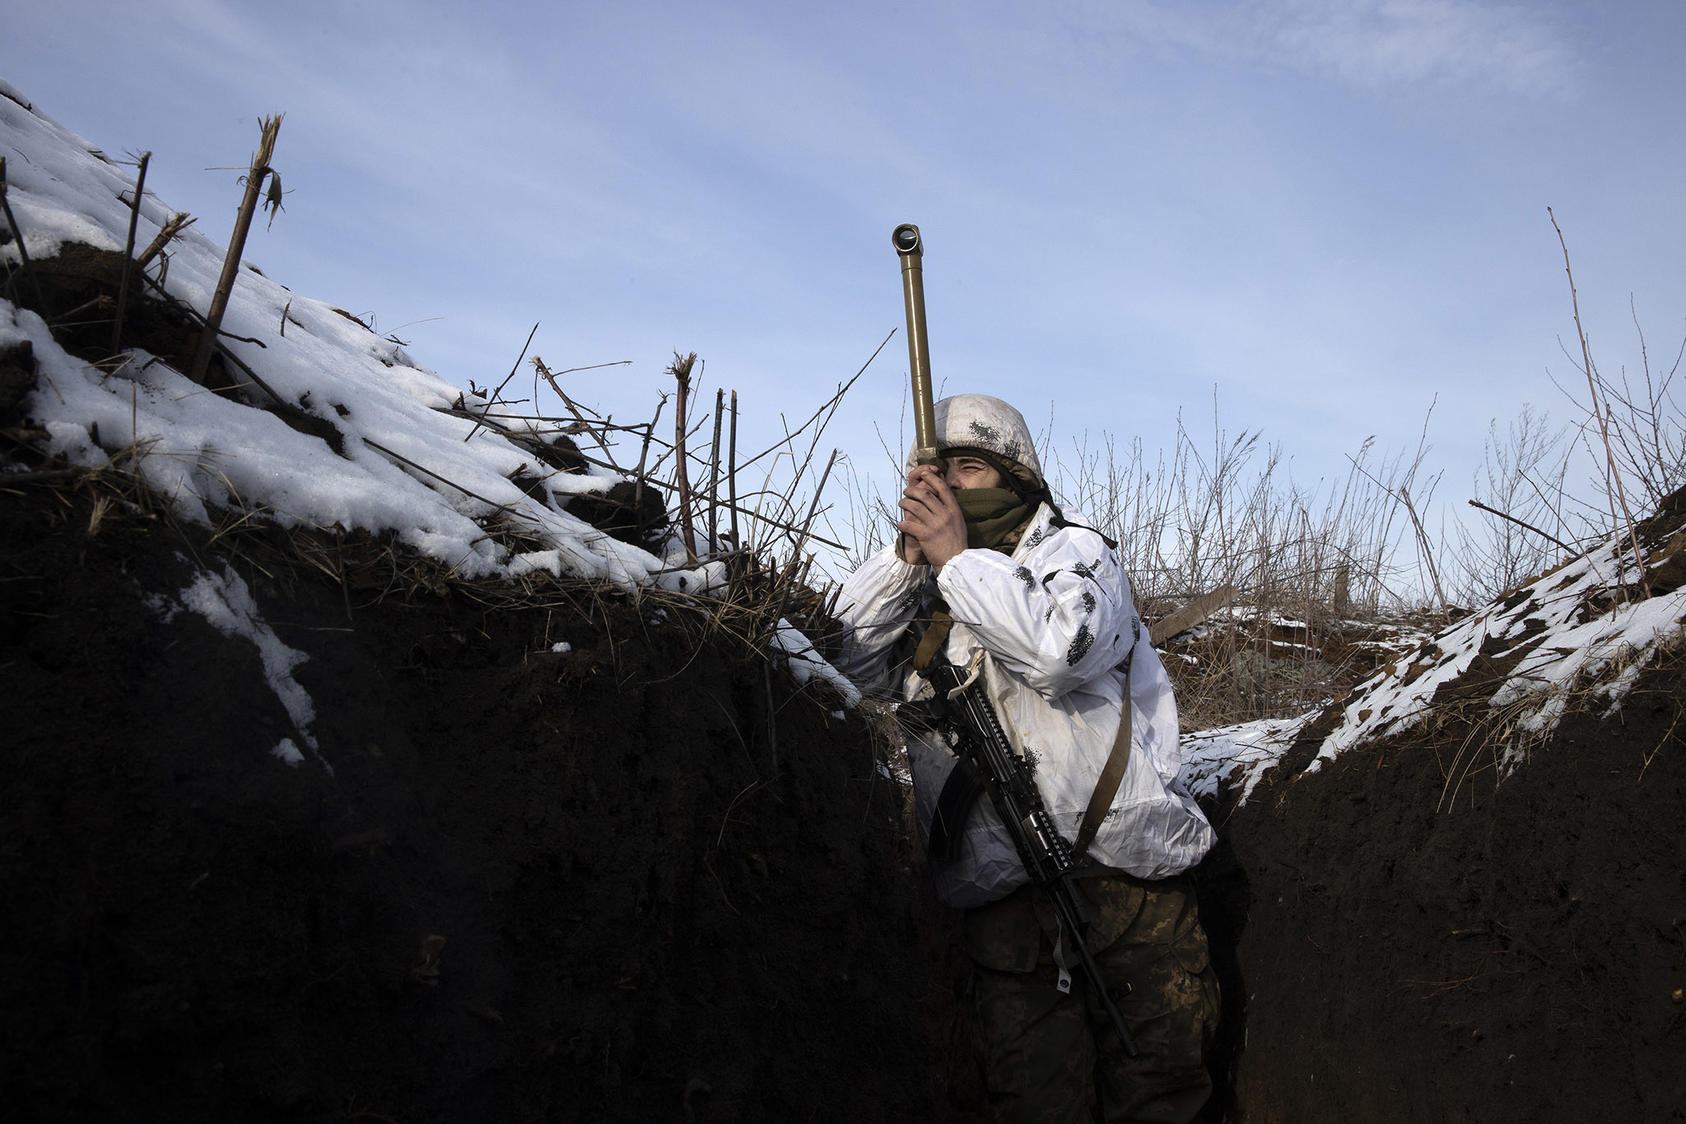 A Ukrainian soldier uses a periscope to survey a front line with Russian proxy forces in eastern Ukraine. Russian troops remain massed at Ukraine’s borders for a possible invasion to escalate the eight-year-old war. (Tyler Hicks/The New York Times)